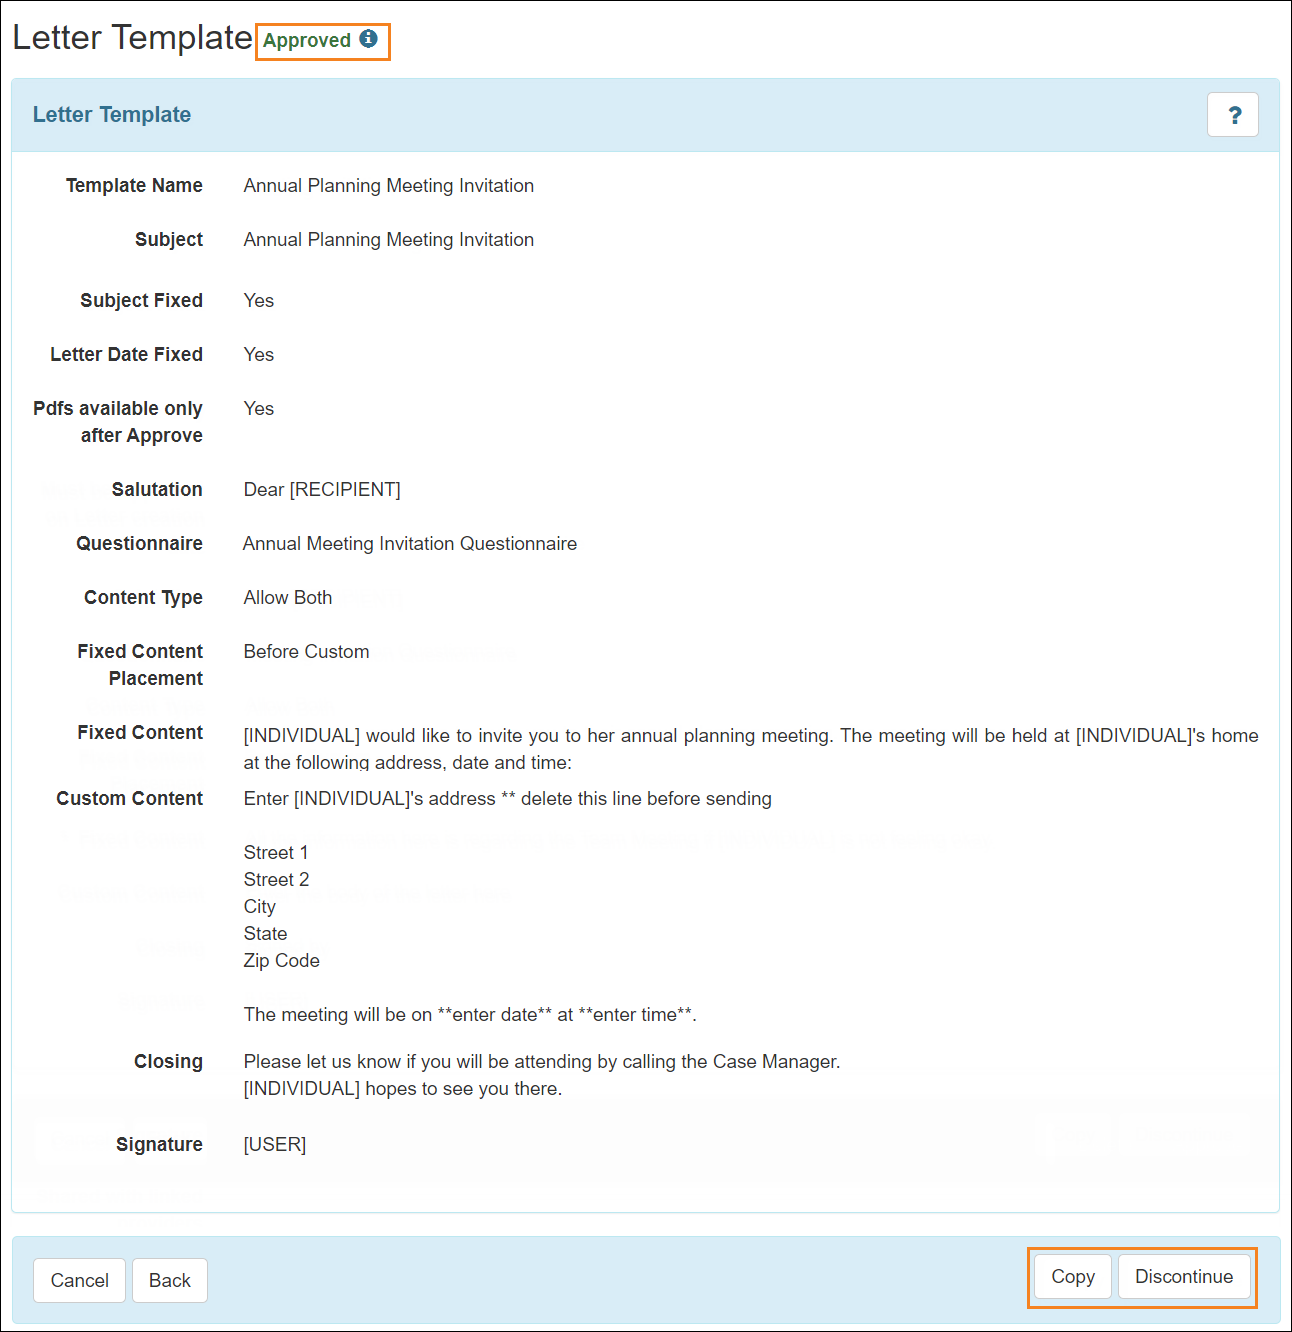 Screenshot showing the Letter Template in Approved Status